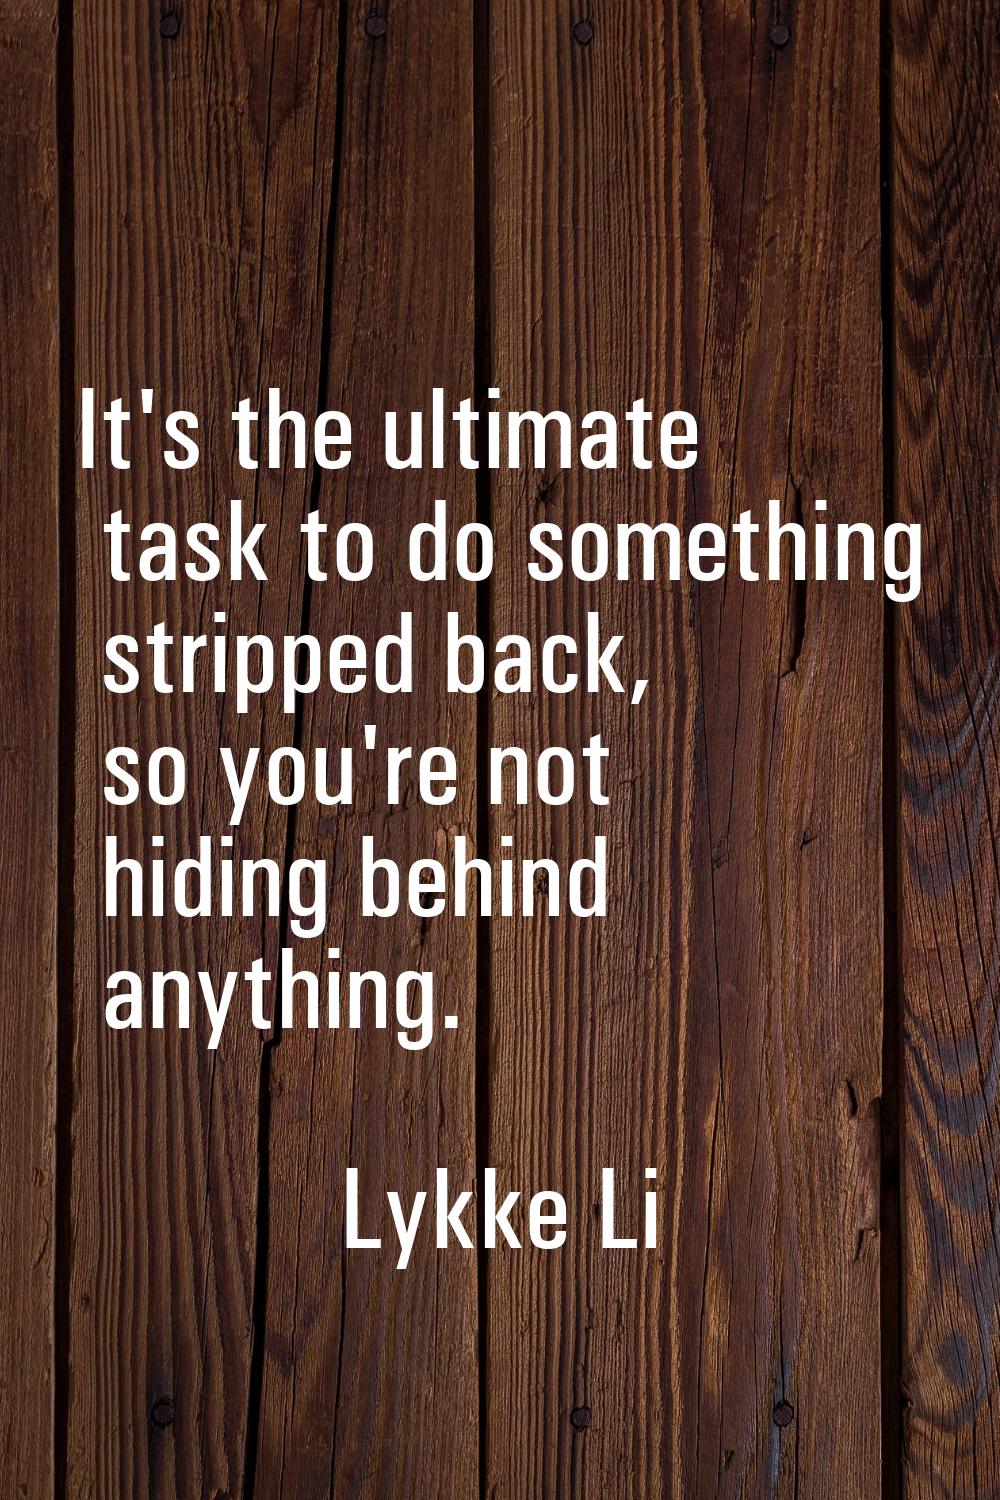 It's the ultimate task to do something stripped back, so you're not hiding behind anything.